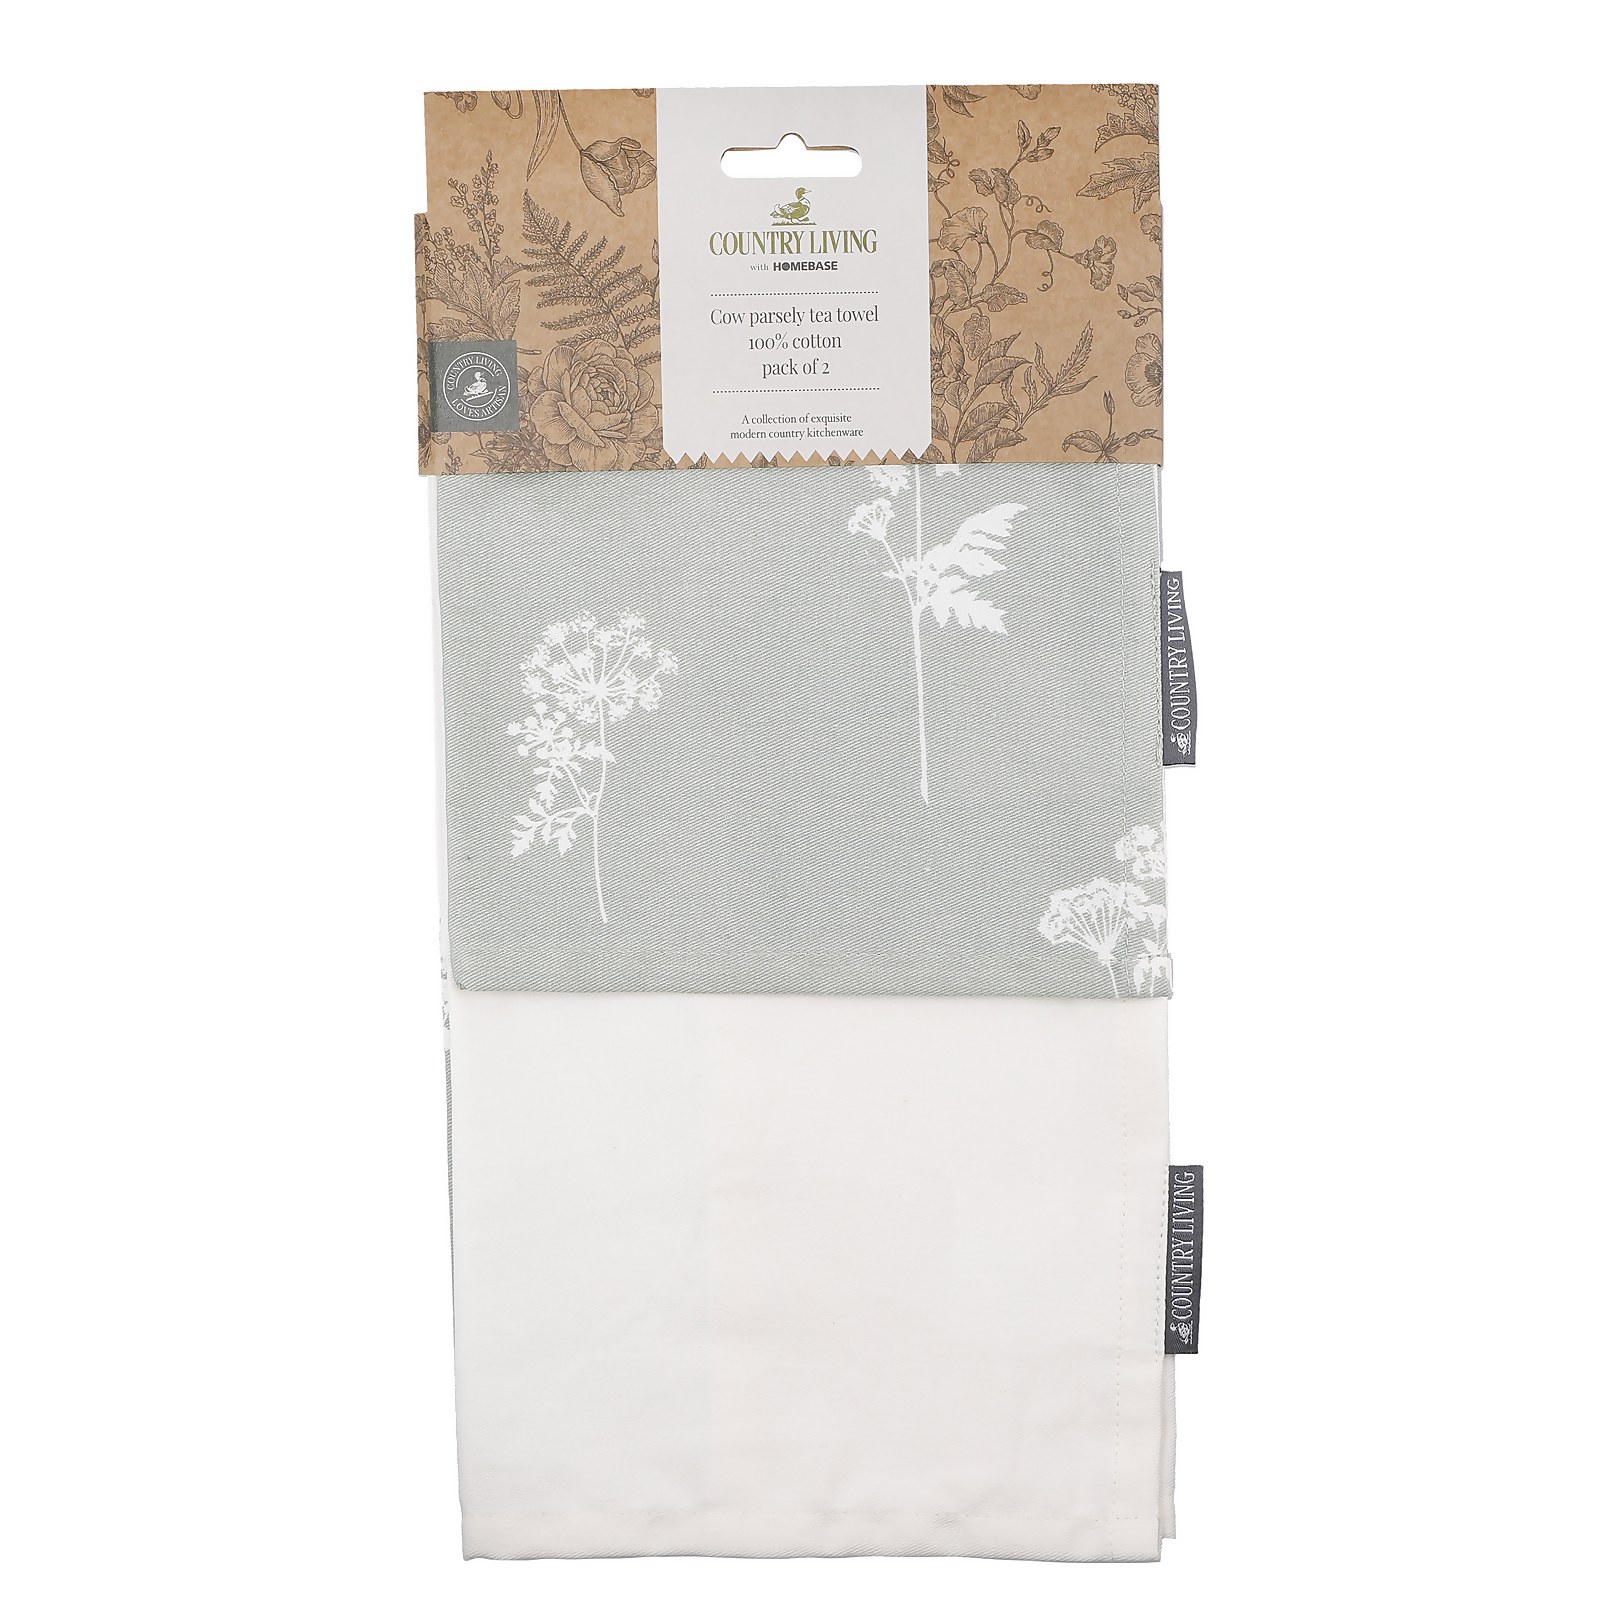 Photo of Country Living Tea Towel Woven Cow Parsley Print - 2 Pack